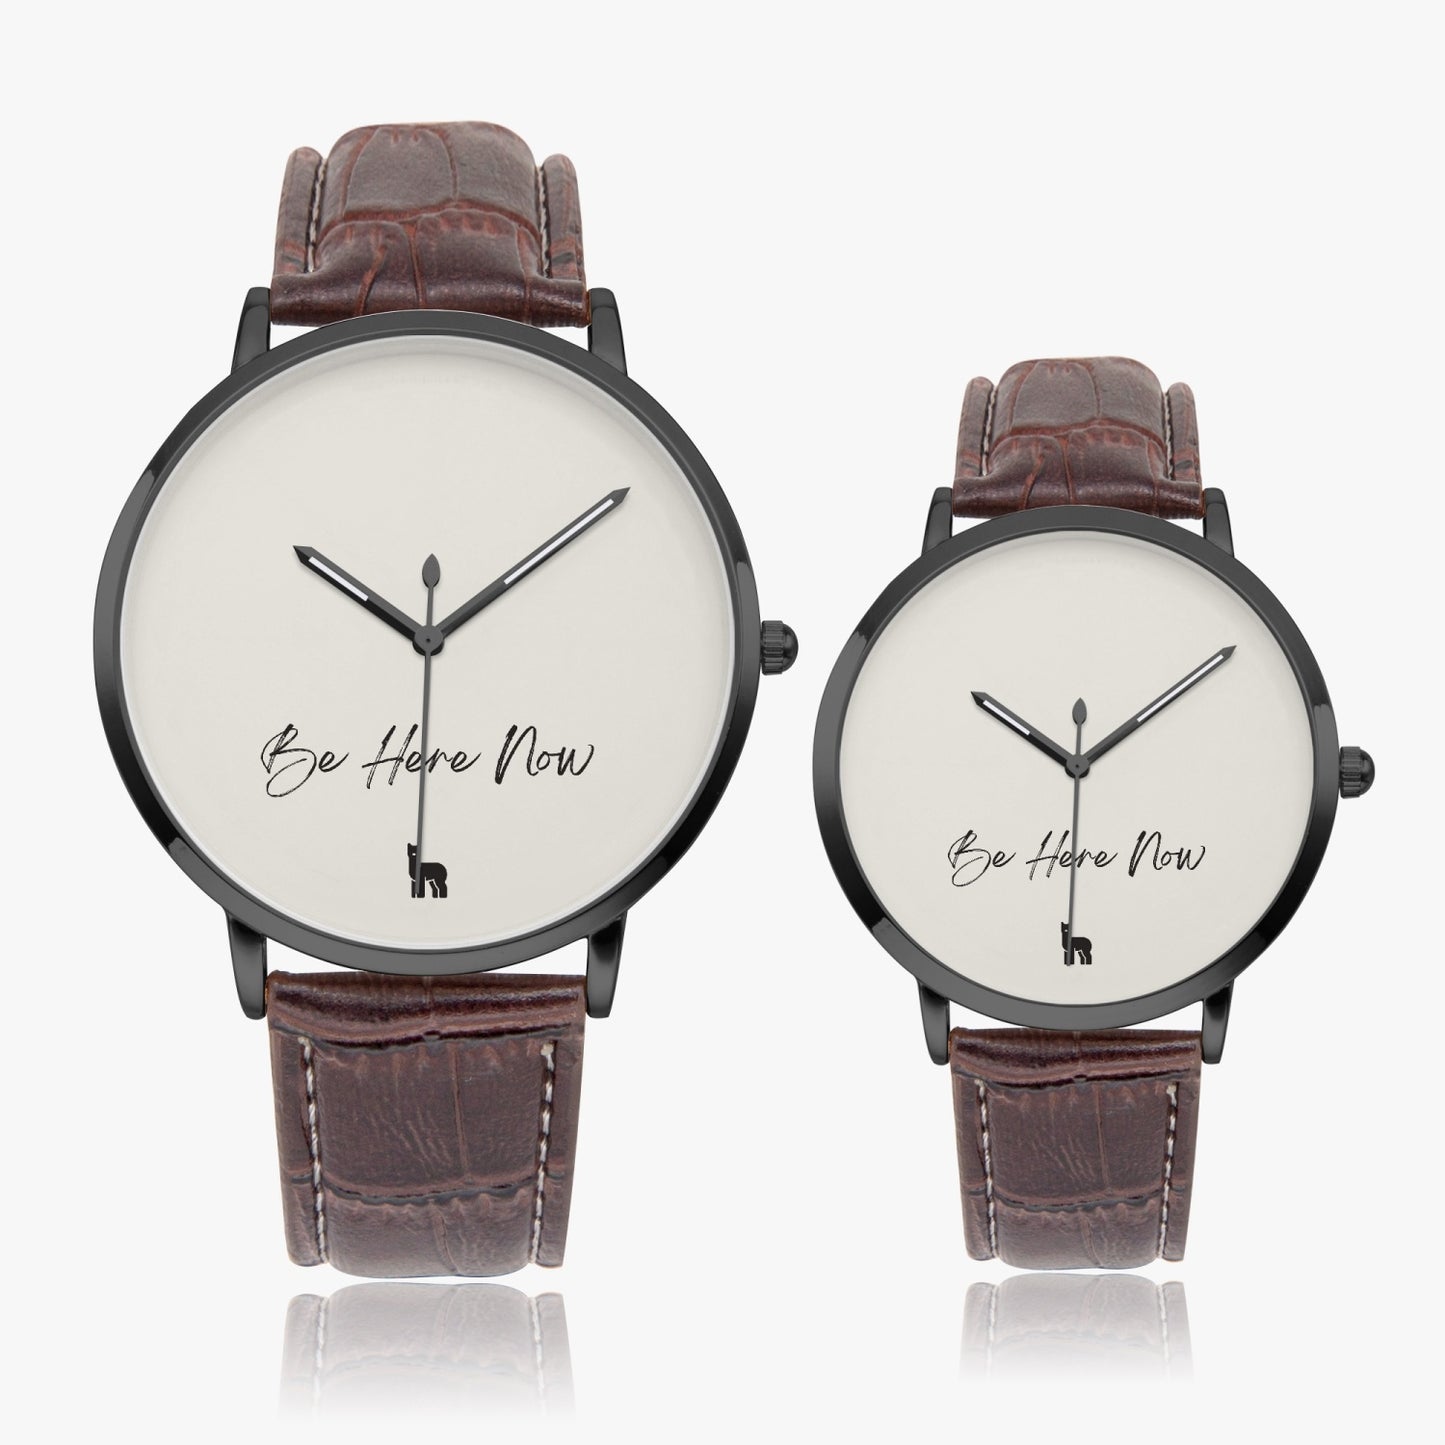 Be Here Now Quartz Watch For Men and Women